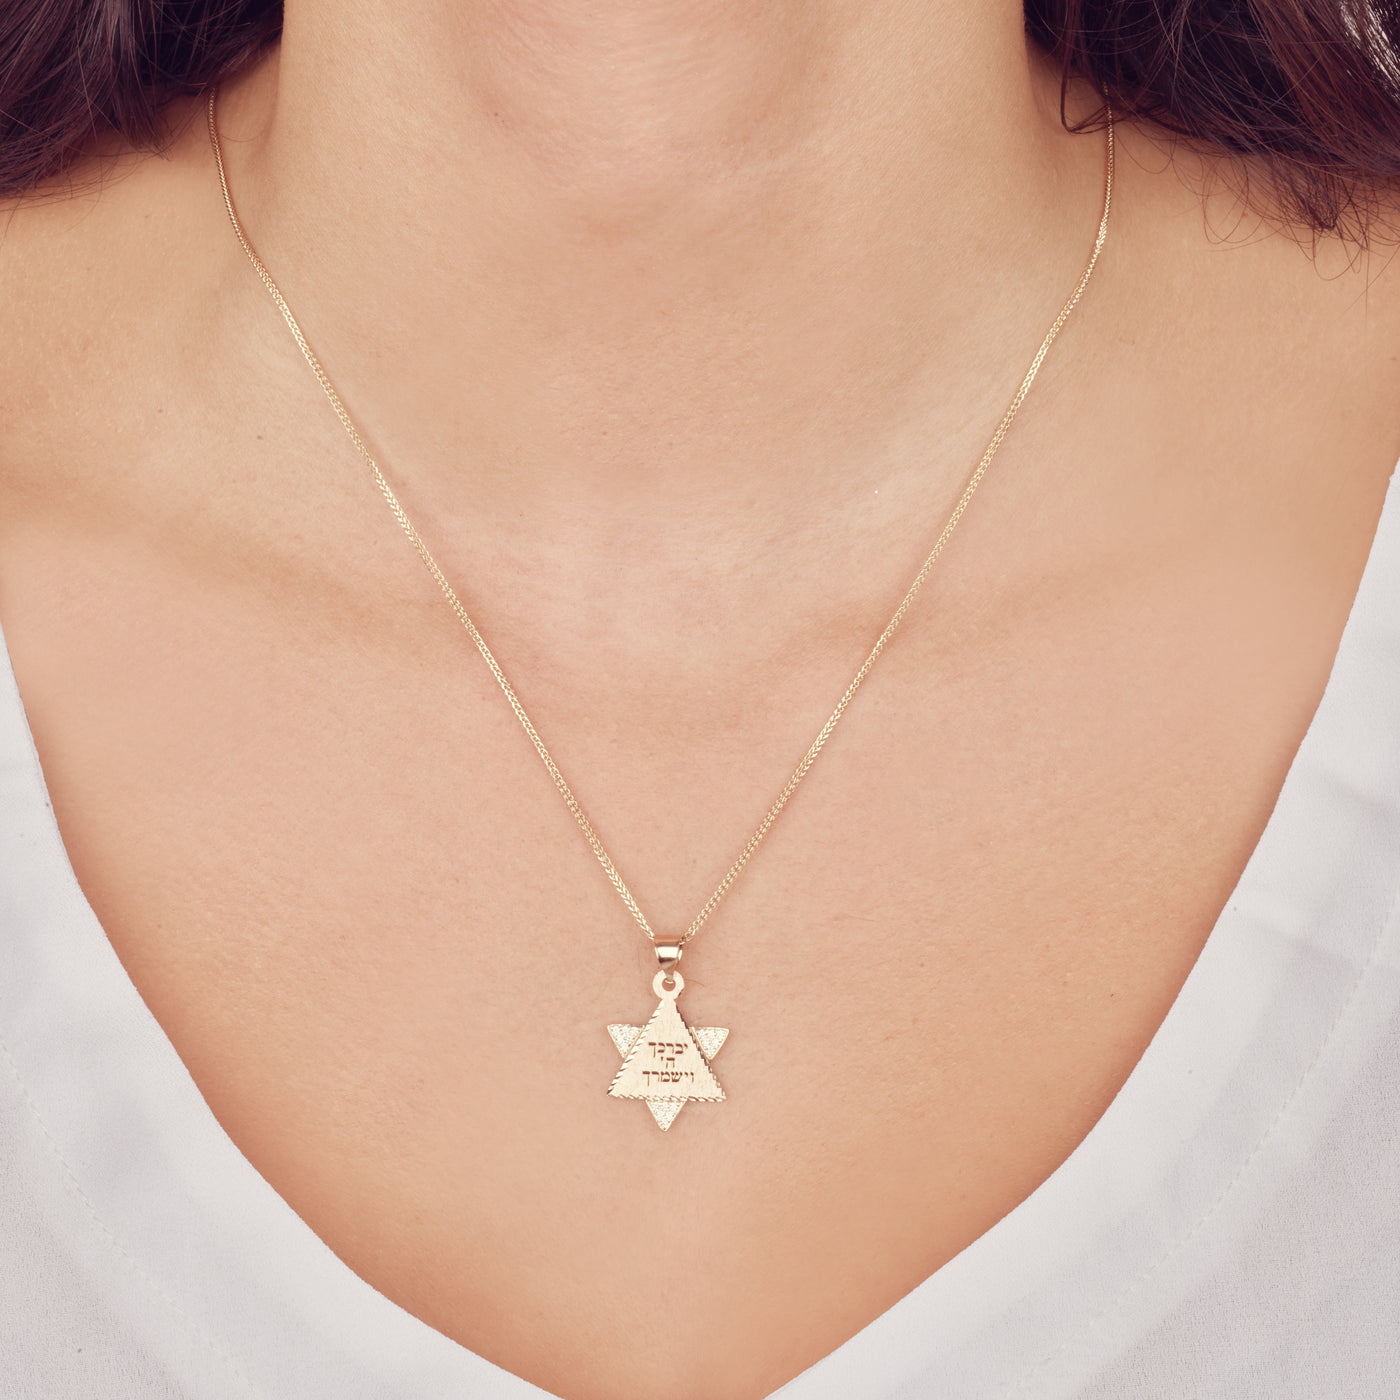 STAR OF DAVID NECKLACE